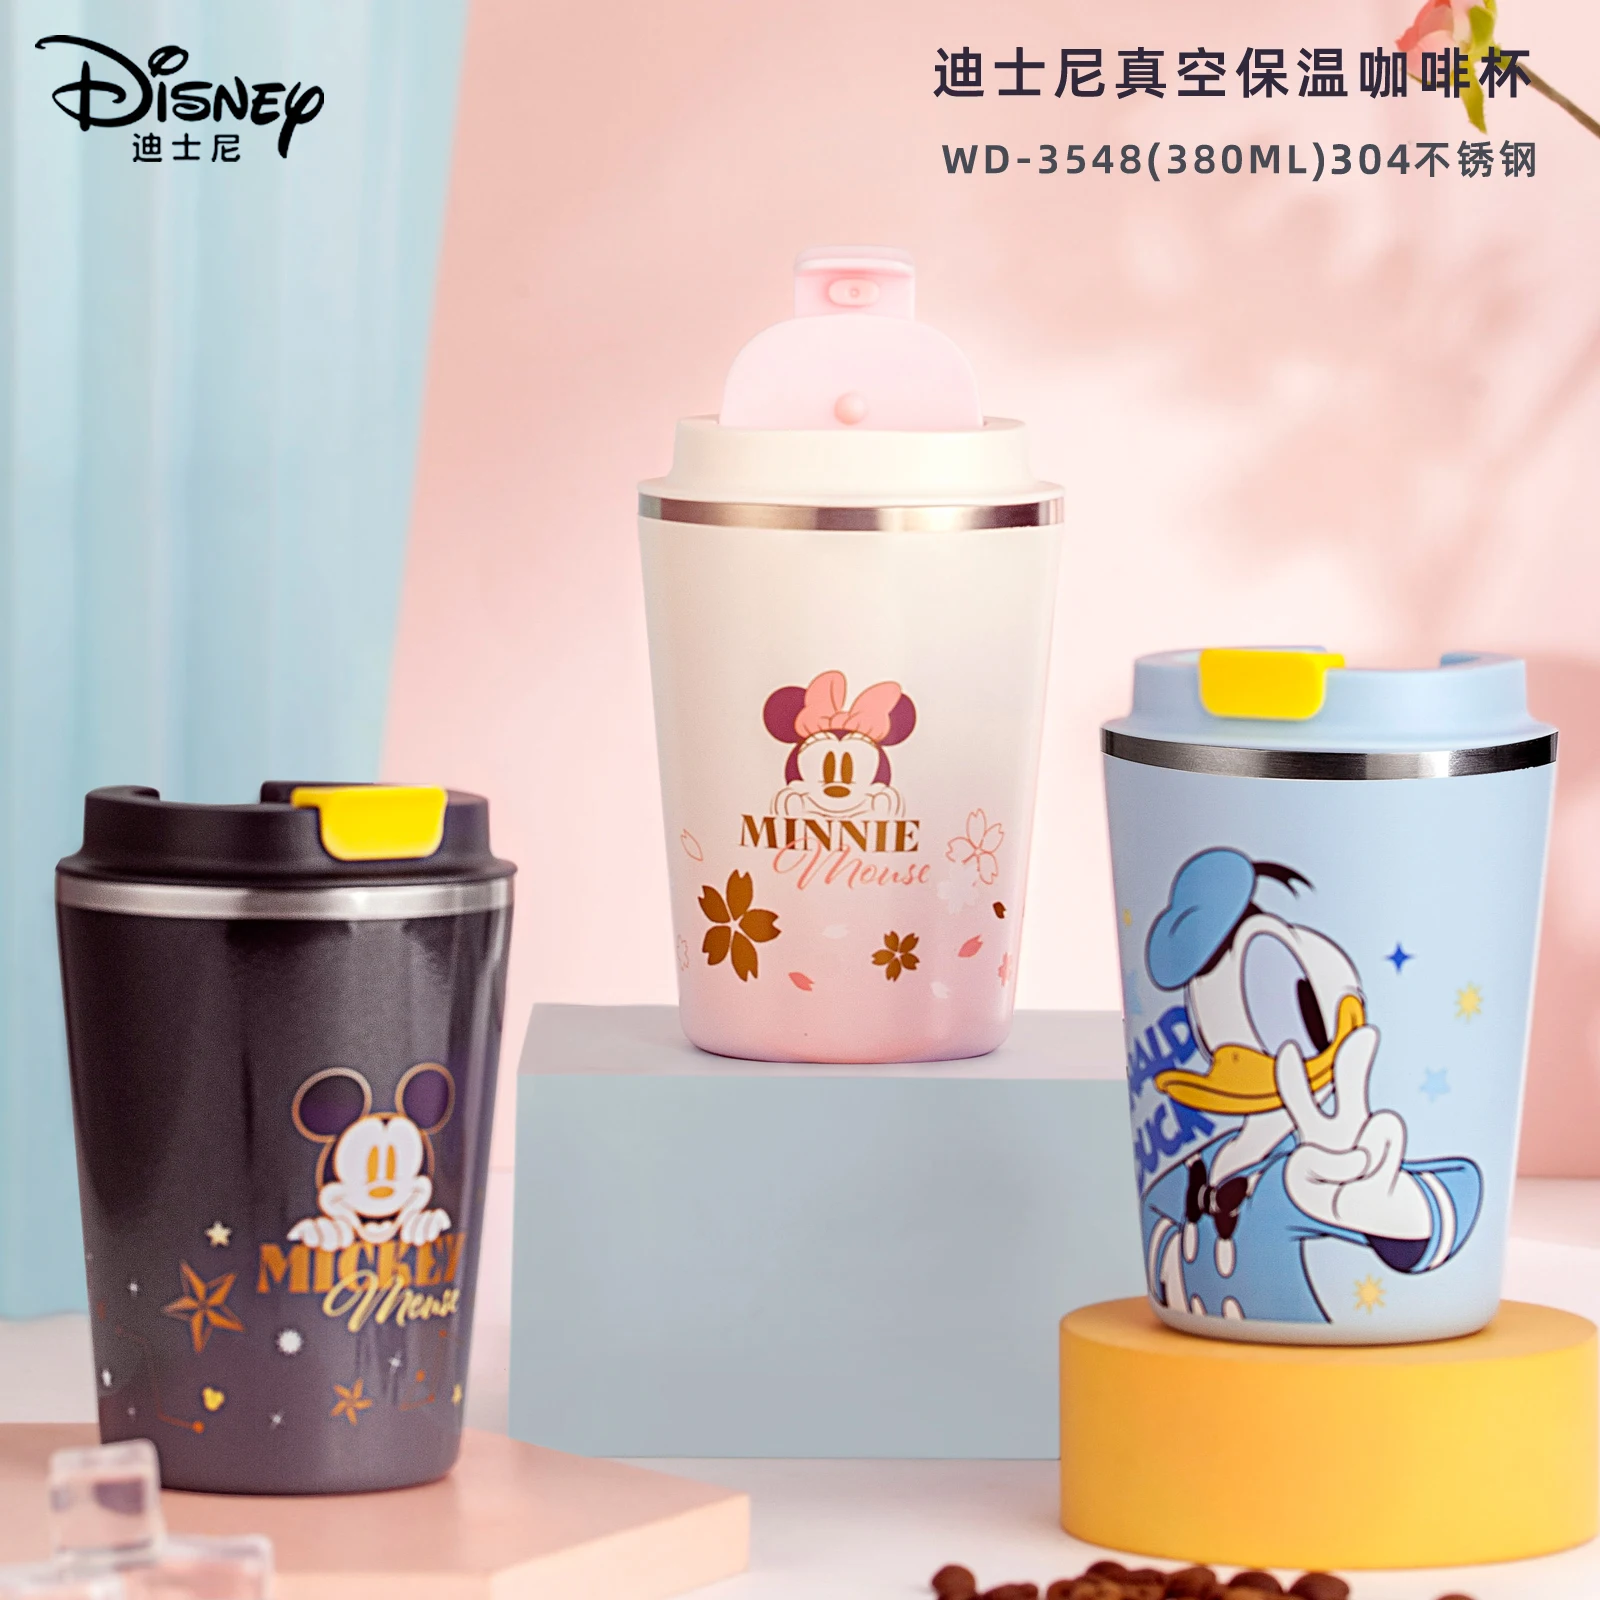 https://ae01.alicdn.com/kf/S3bb77a37507f456c8eb49a129e353601D/Kawaii-Disney-Anime-Hobby-Donald-Duck-Mickey-Mouse-Portable-Stainless-Steel-Thermos-Coffee-Mug-with-Lid.jpg